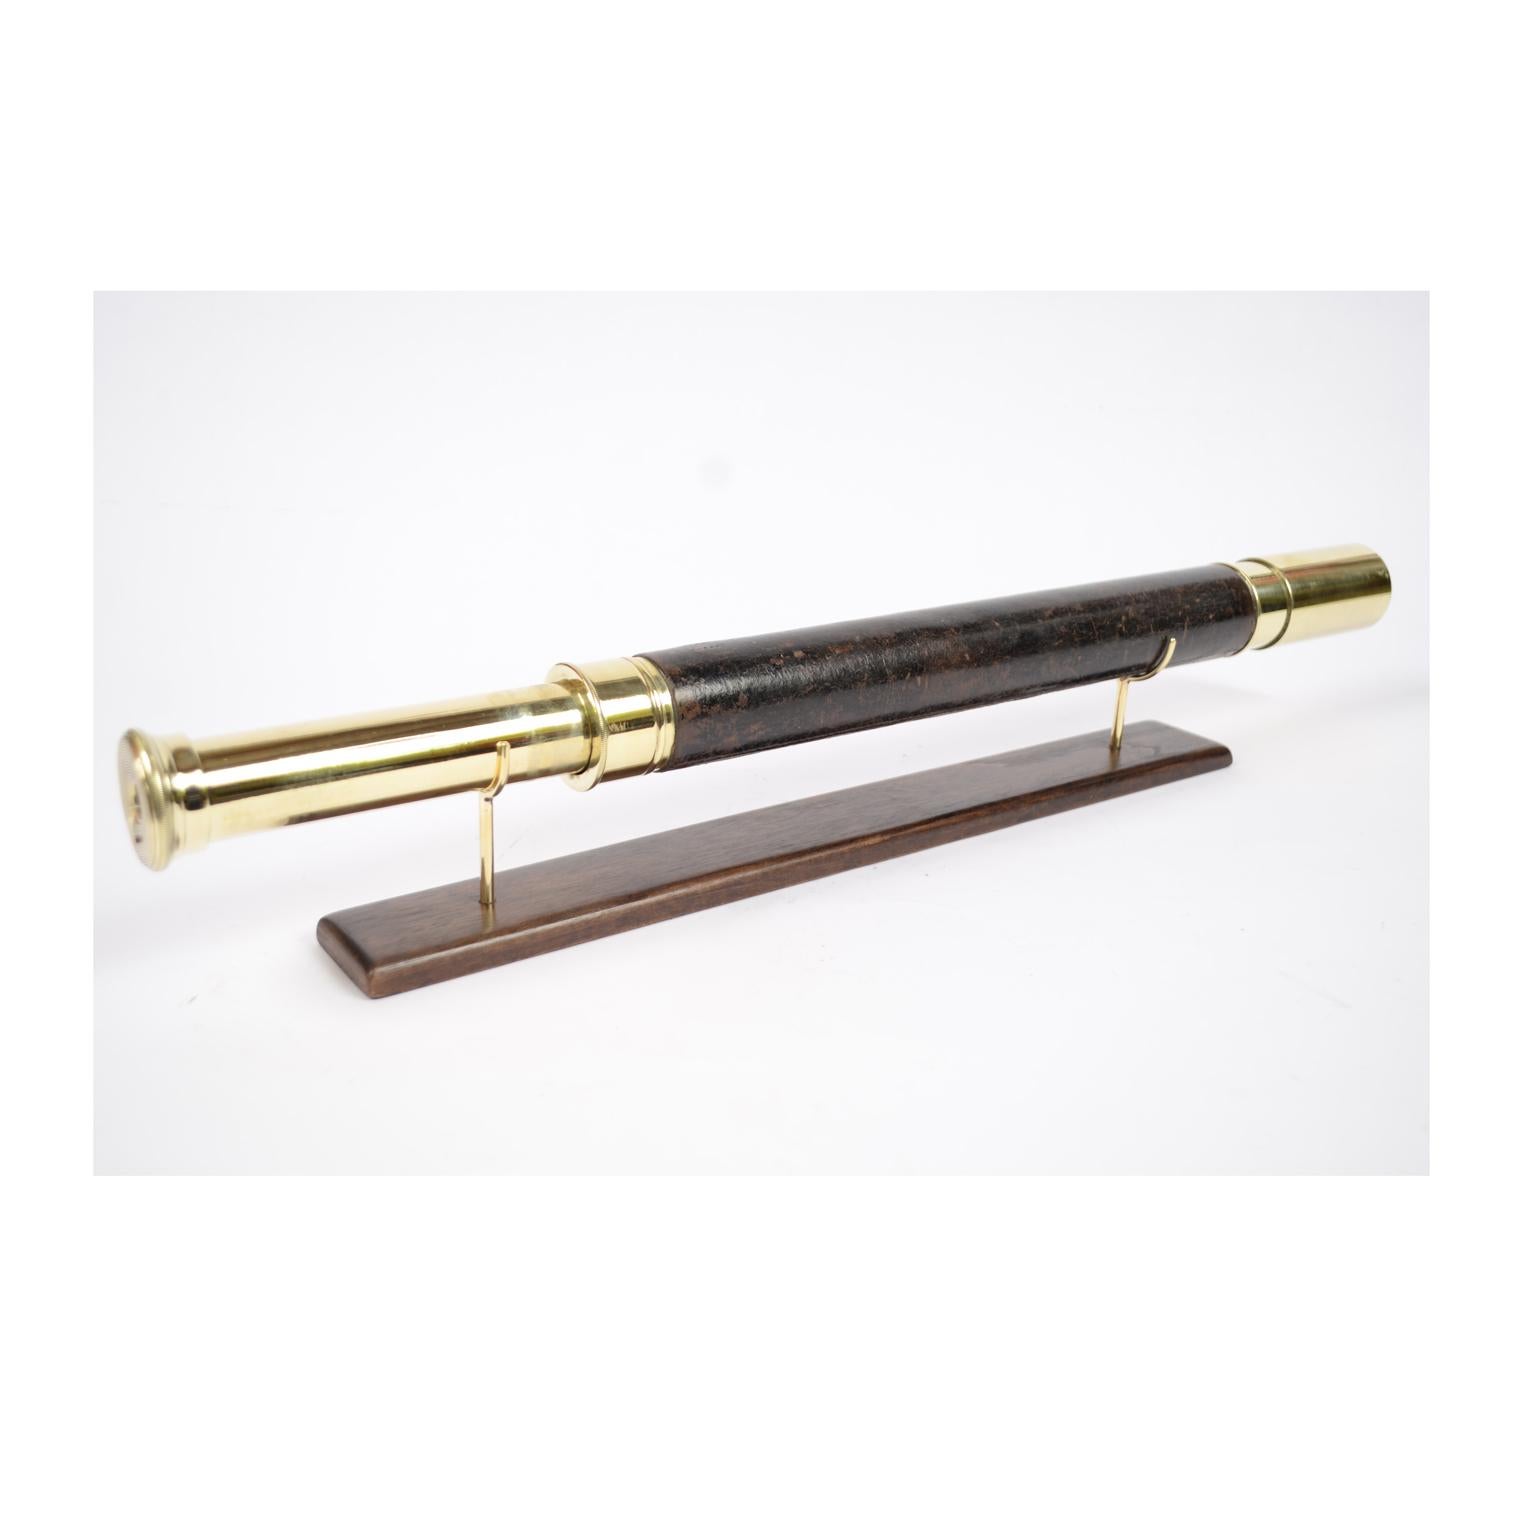 Brass telescope with leather-covered handle, signed H. Hughes & Son Ltd London focusing with one extension of the early 1900s. Measures: Maximum length 64 cm, minimum 44 cm, focal diameter 4 cm. Excellent condition fully and functional, complete